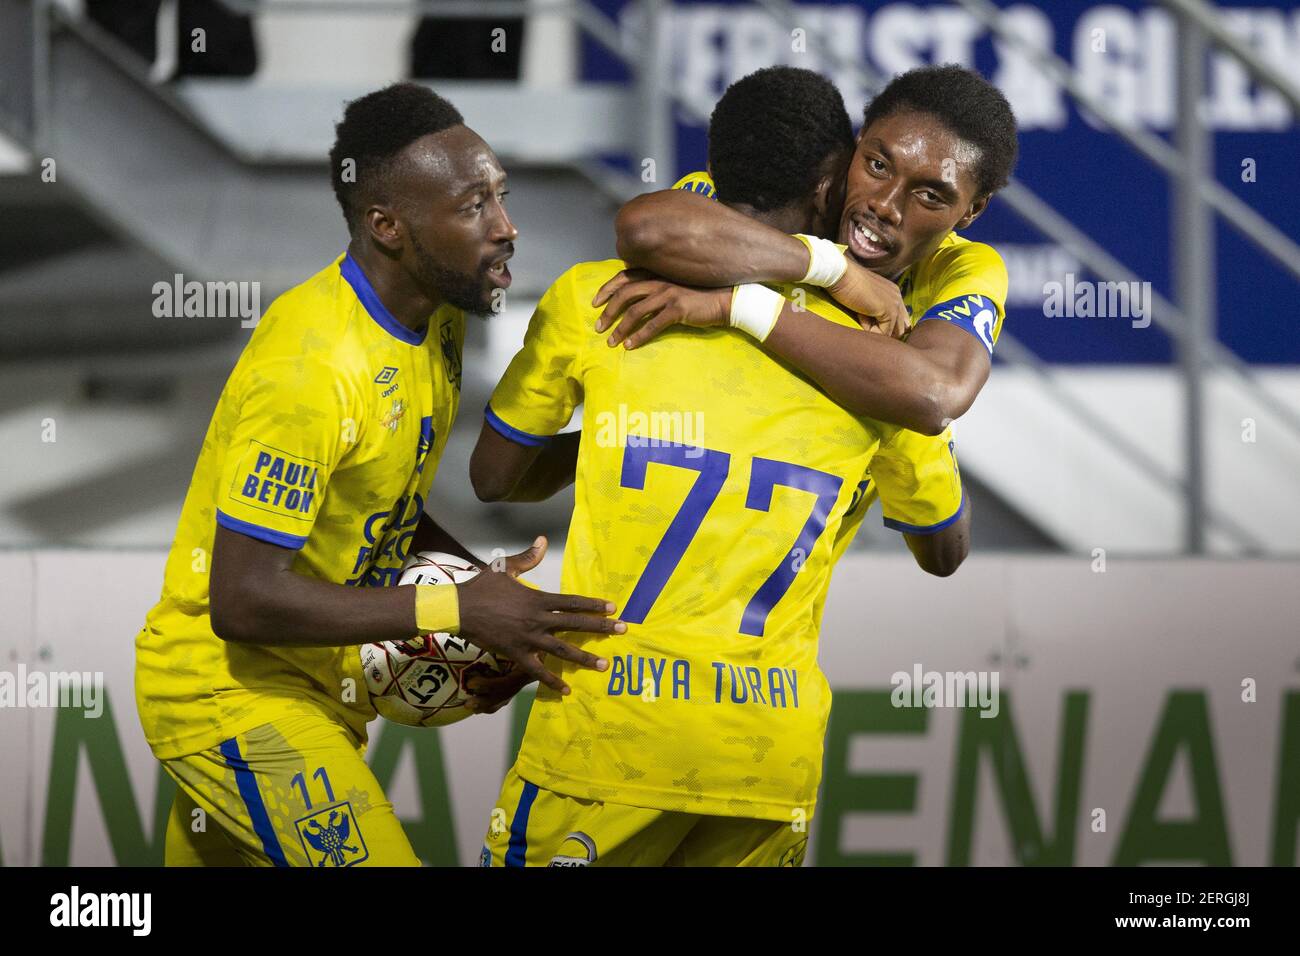 SINT-TRUIDEN, BELGIUM - AUGUST Mohamed Buva Turay celebrate after scoring a  goal with Jordan Botaka and Yohan Boli during the Jupiler Pro League  matchday 3 between STVV and Sporting Lokeren on August